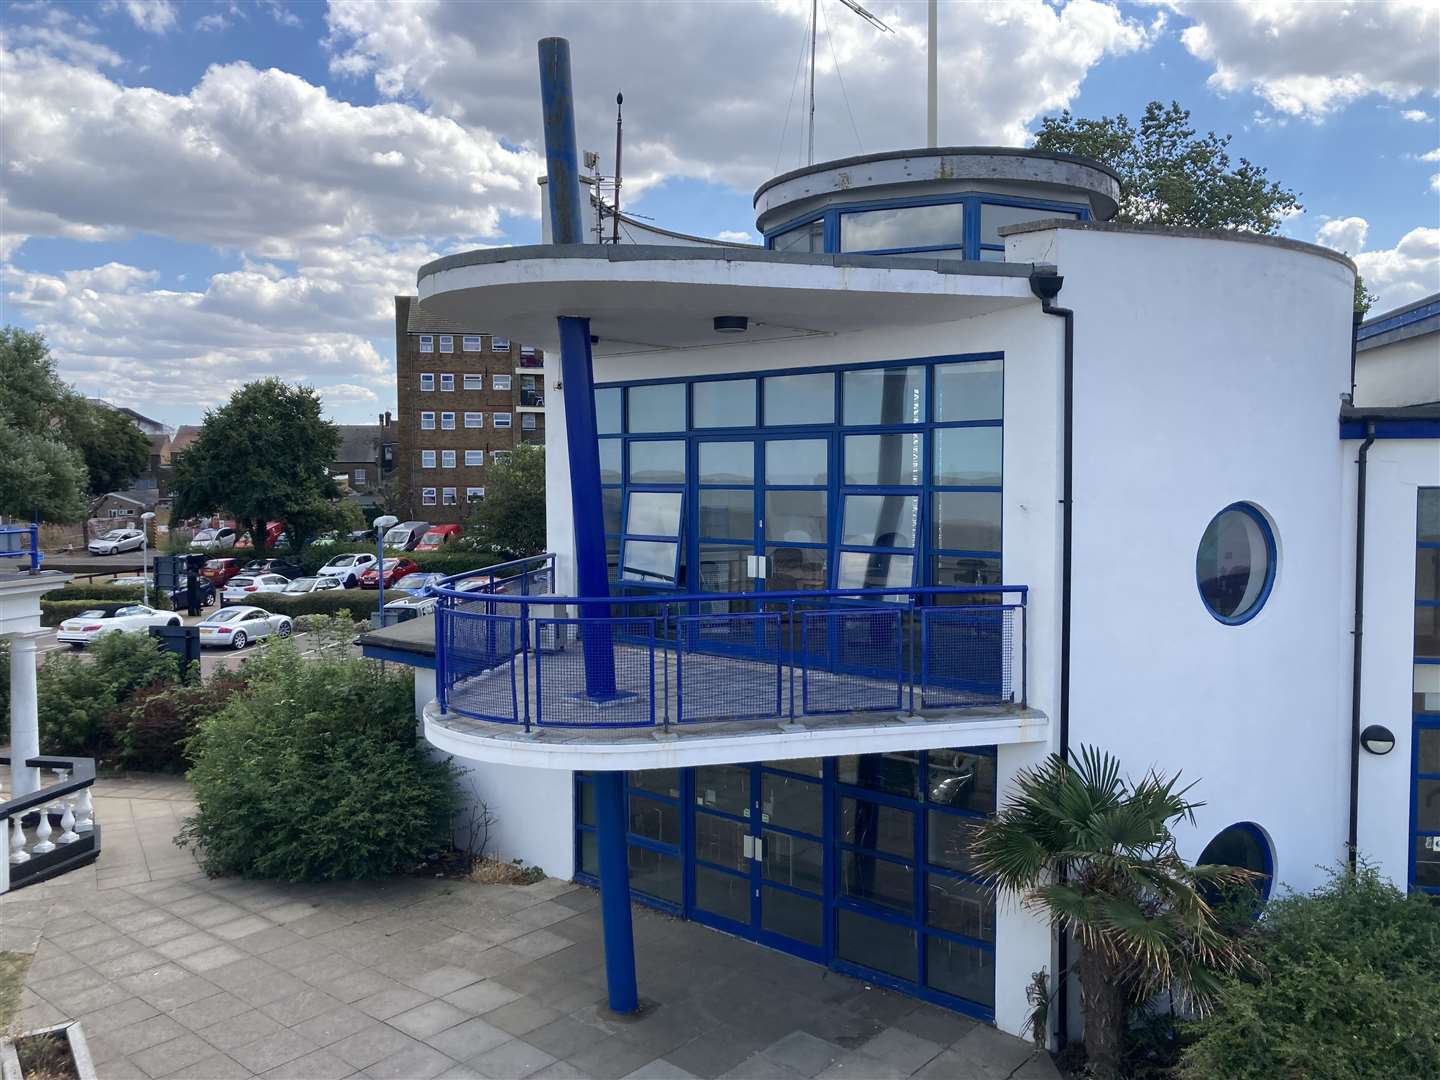 Sheppey Healthy Living Centre and Leisure Centre. New upstairs cafe would have sea views. Picture: John Nurden (59470617)